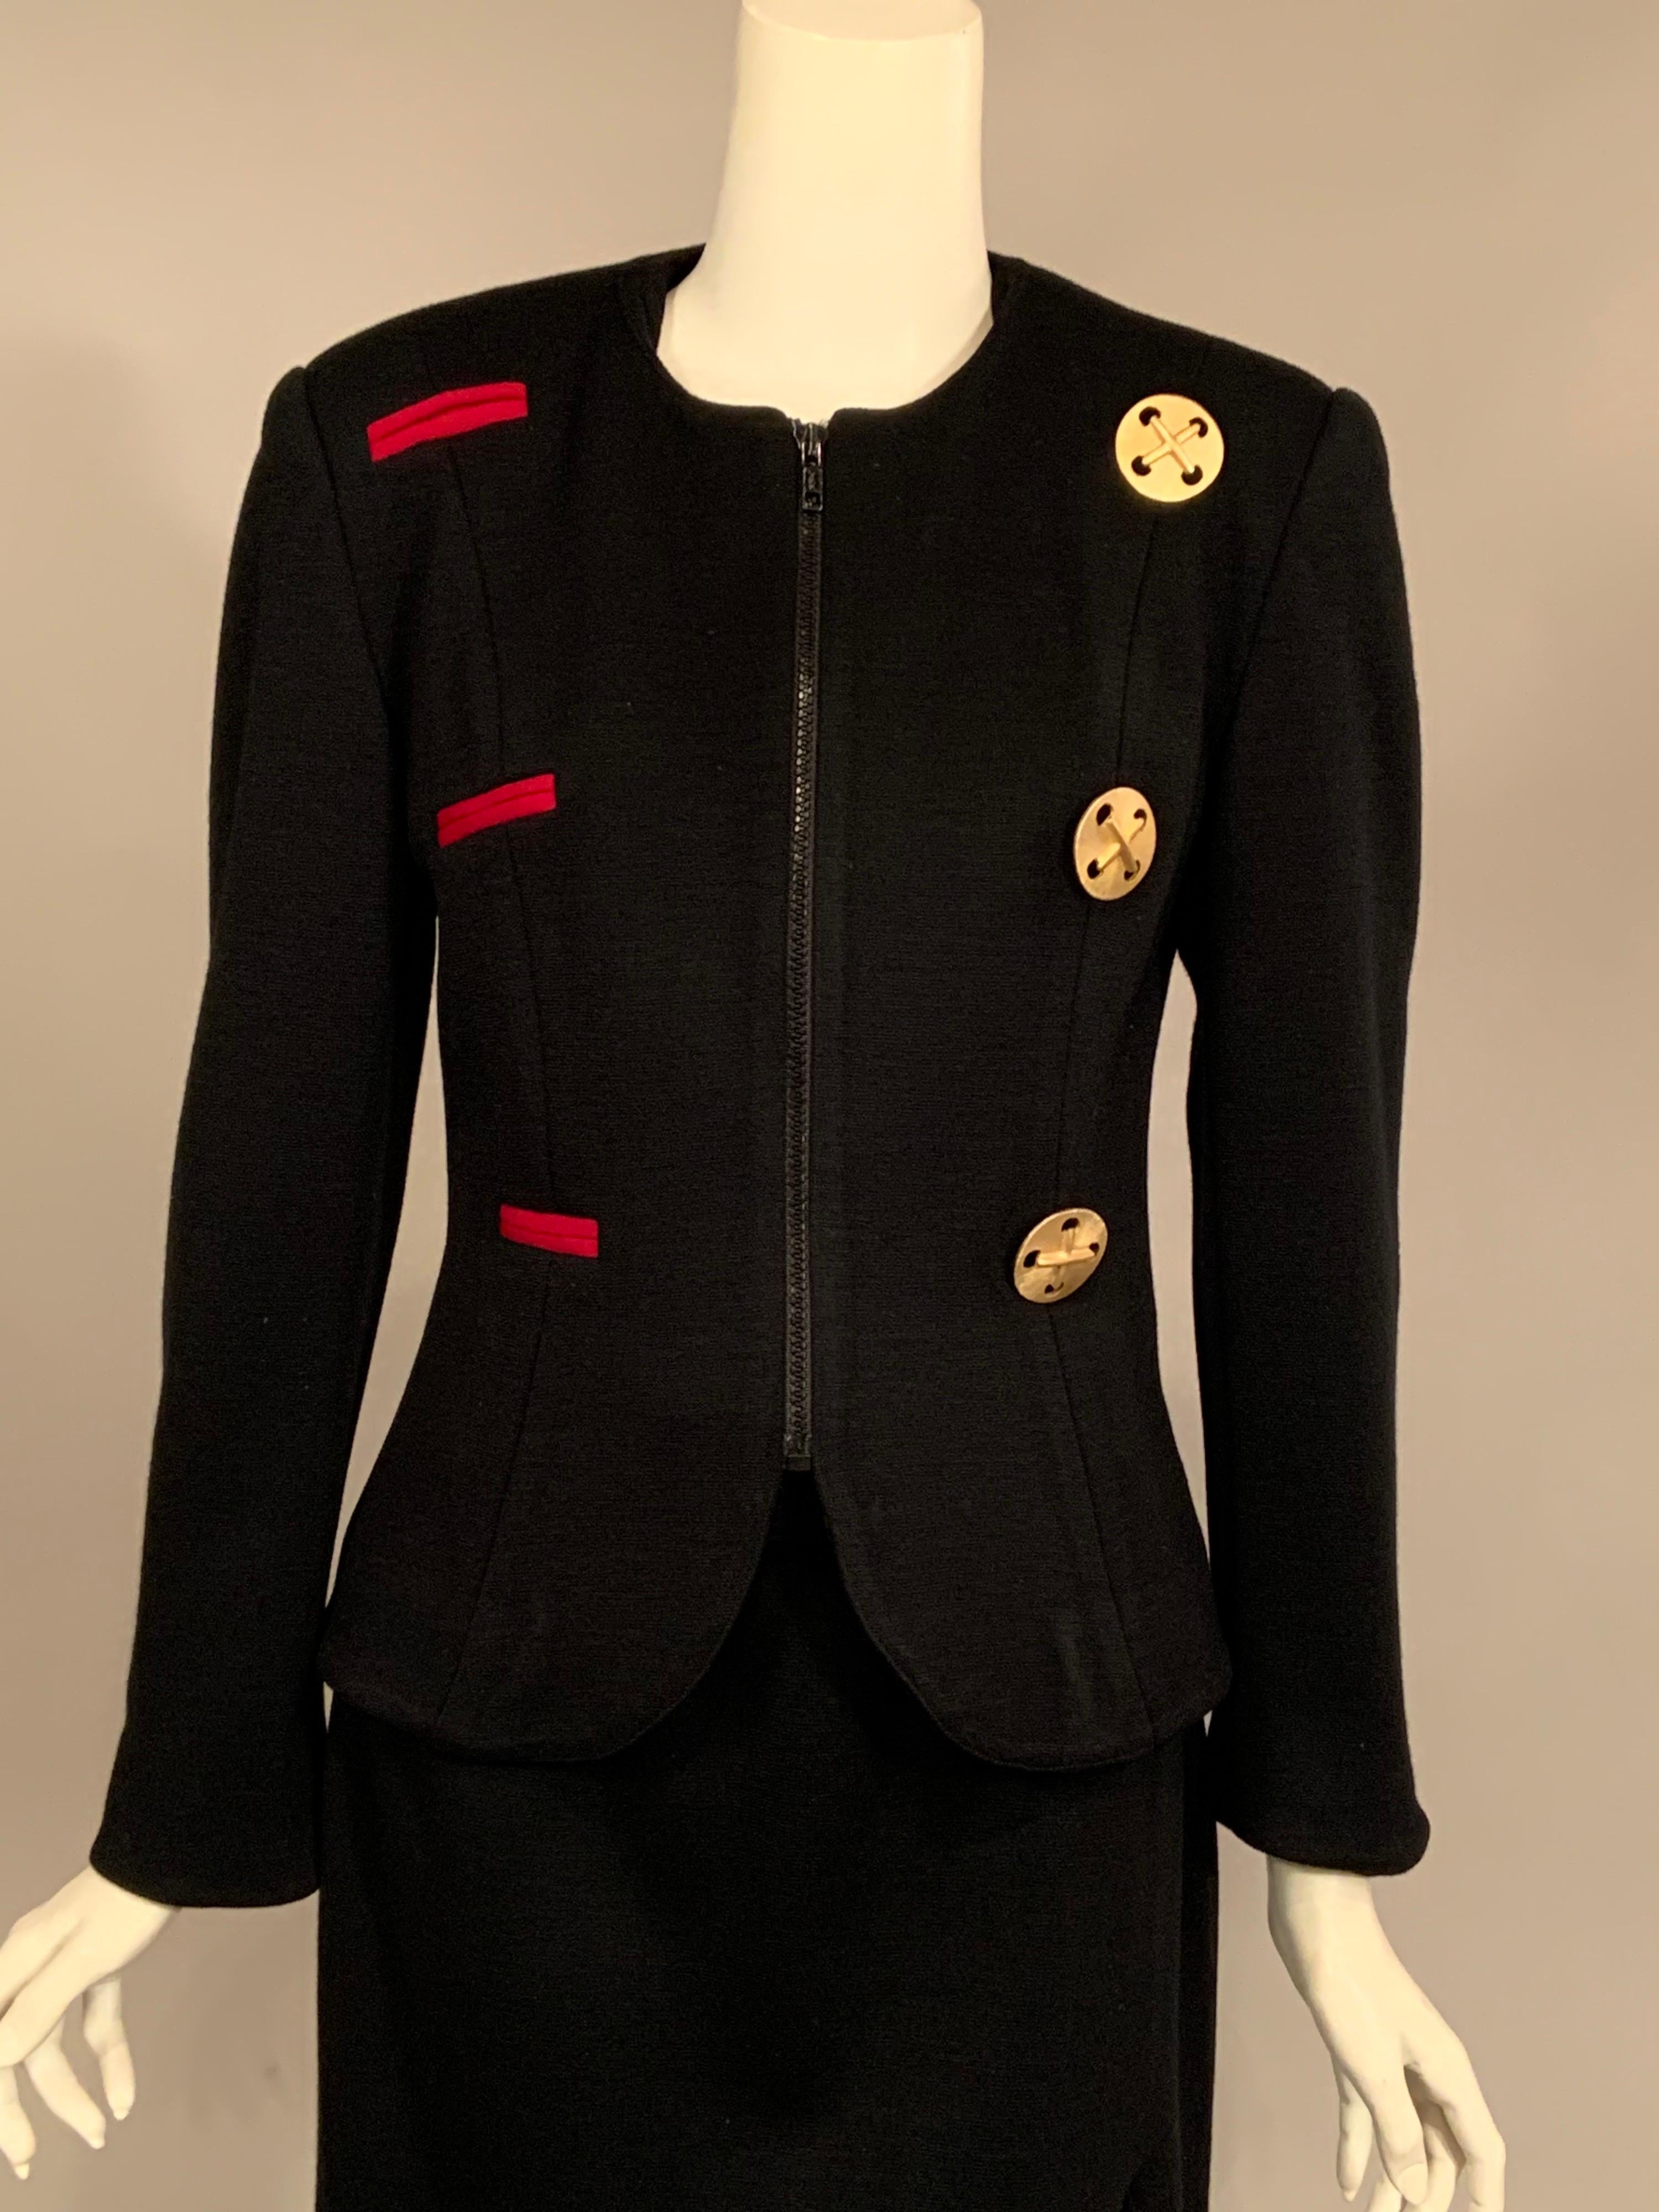 This is a fun little black skirt suit from Toby Lerner, one of the very exclusive ladies shops in Philadelphia.  The collarless jacket has a zipper at the center front, with three large decorative gold toned buttons on one side and three large red